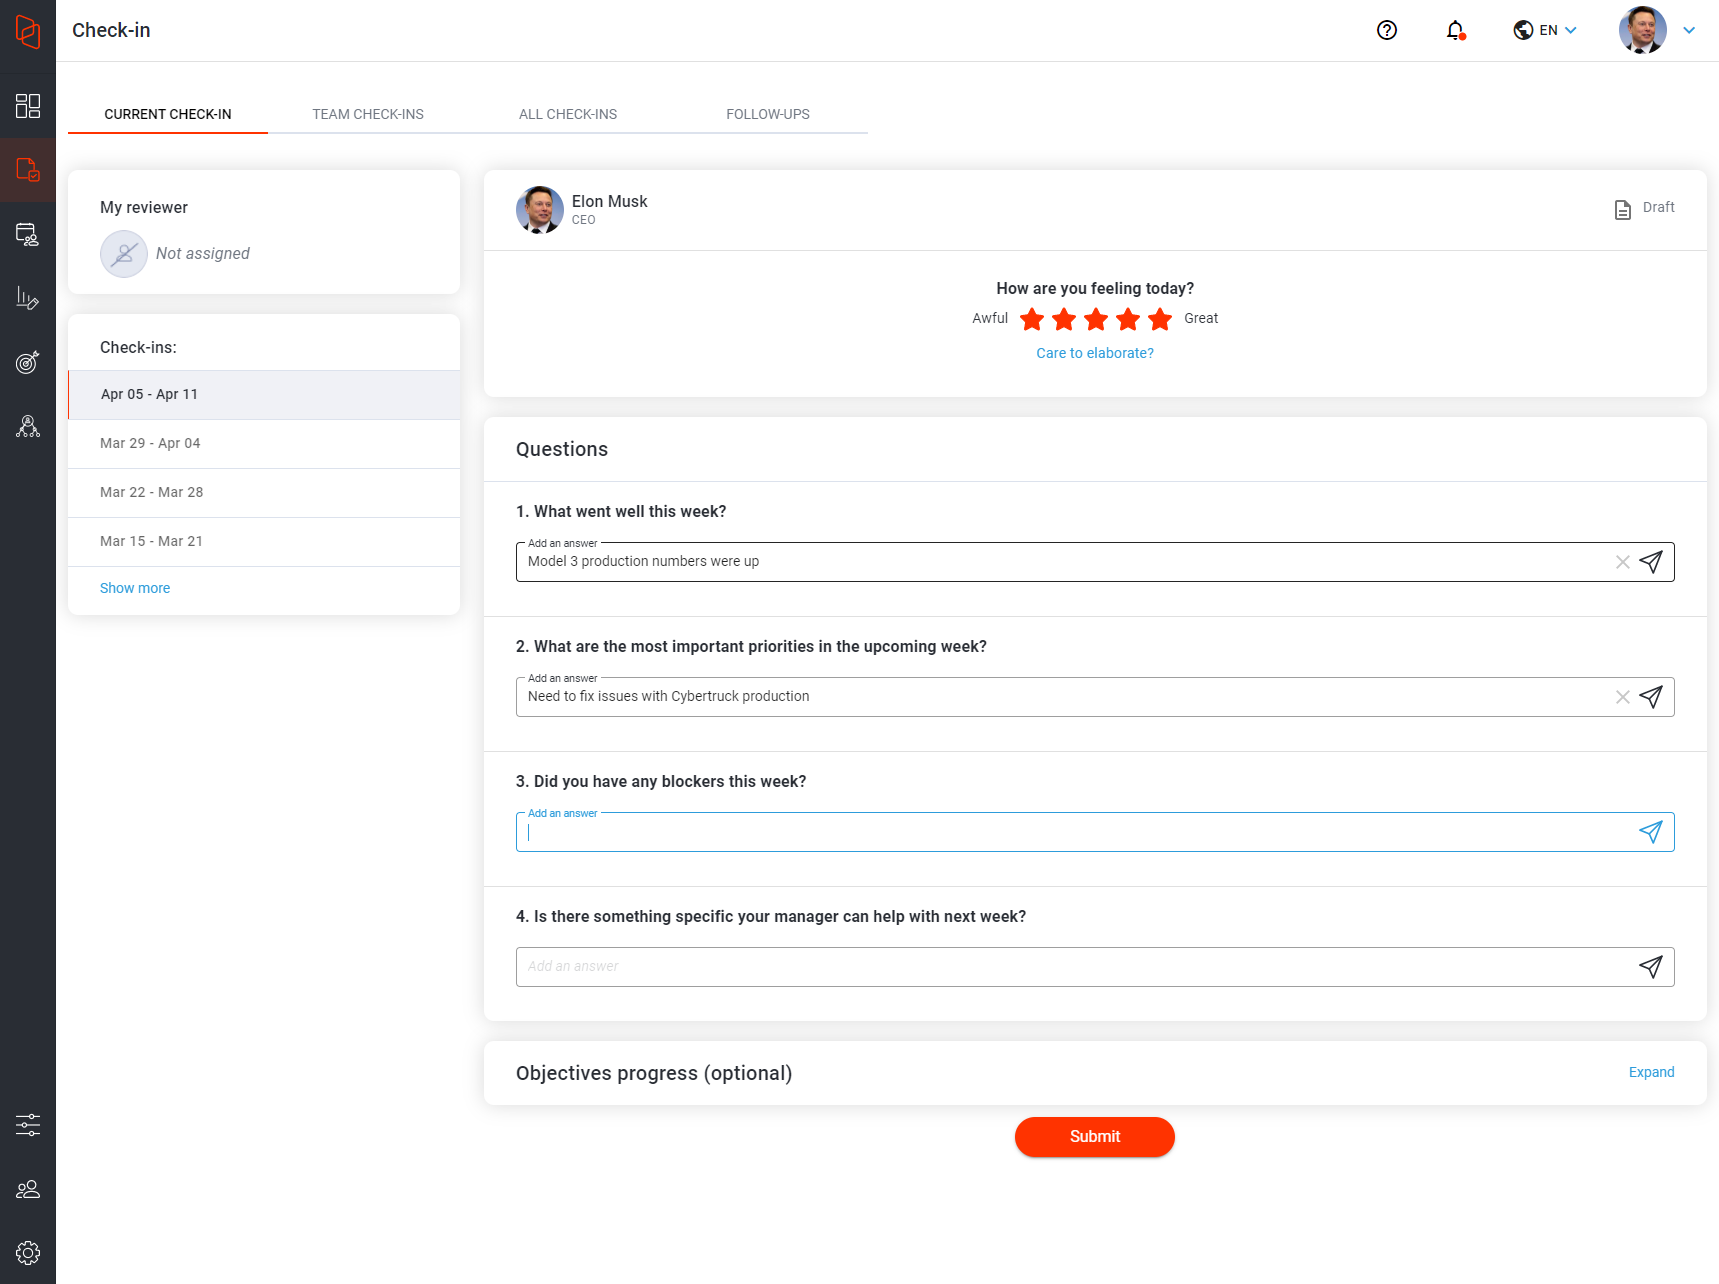 Hirebook's check in lets you score your week and share key information with your manager. By customizing questions to your organization’s culture, Hirebook allows you to drill deep into engagement and productivity while fostering stronger relationships.